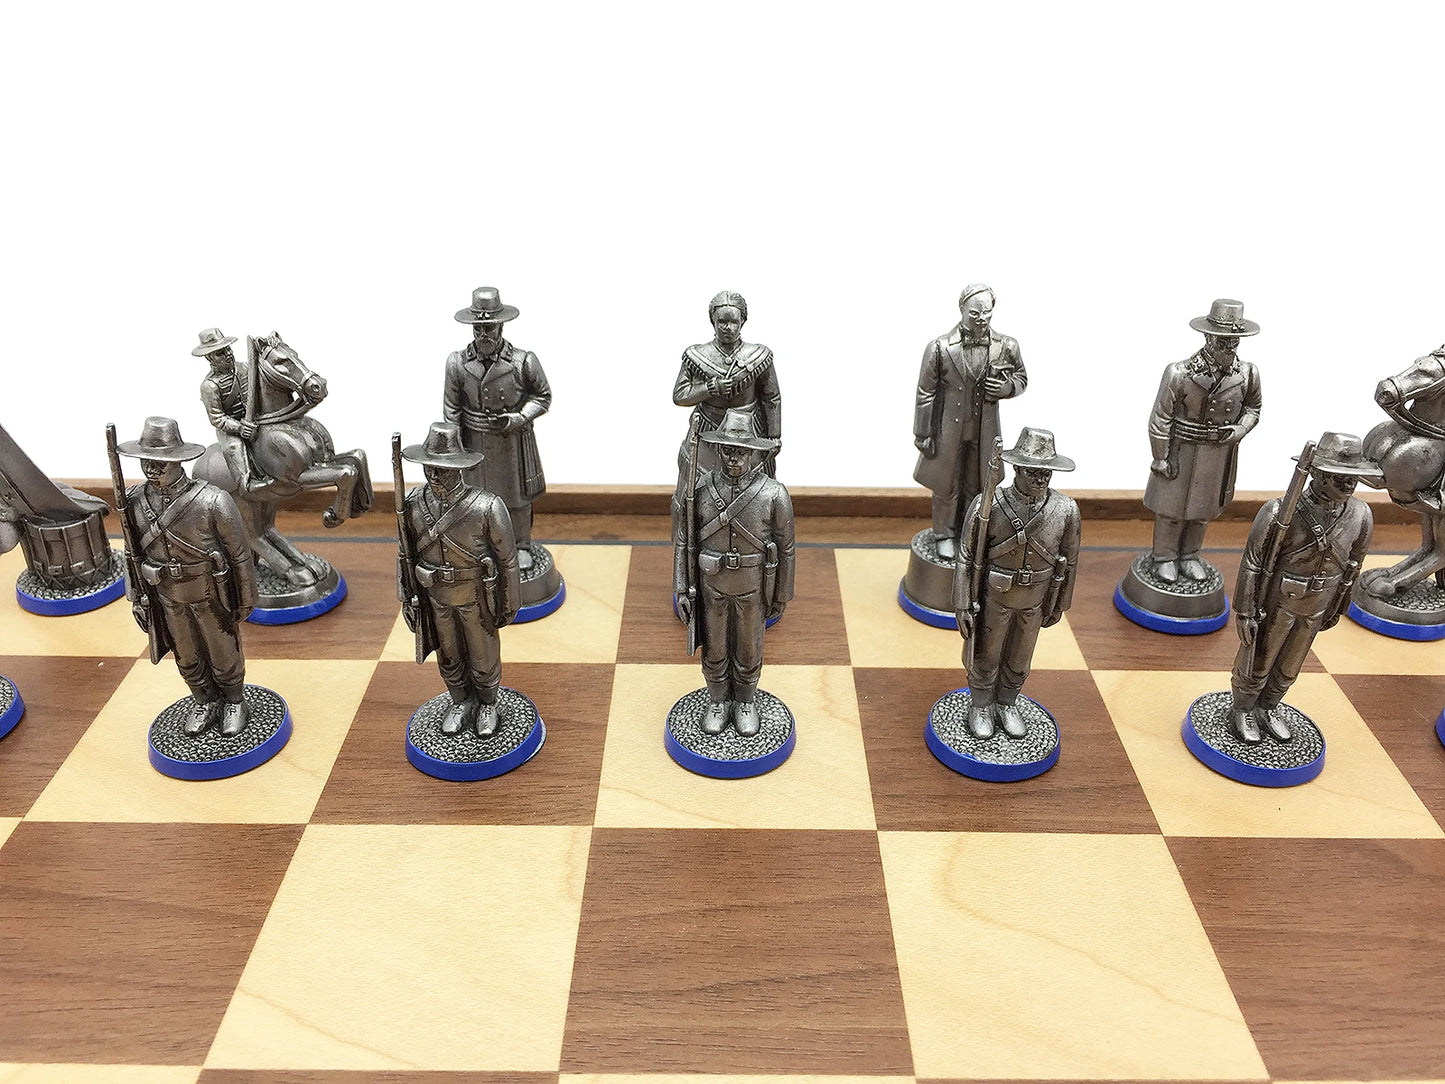 Toy soldier Antique finish. American Civil War Chess Set. Confederates.